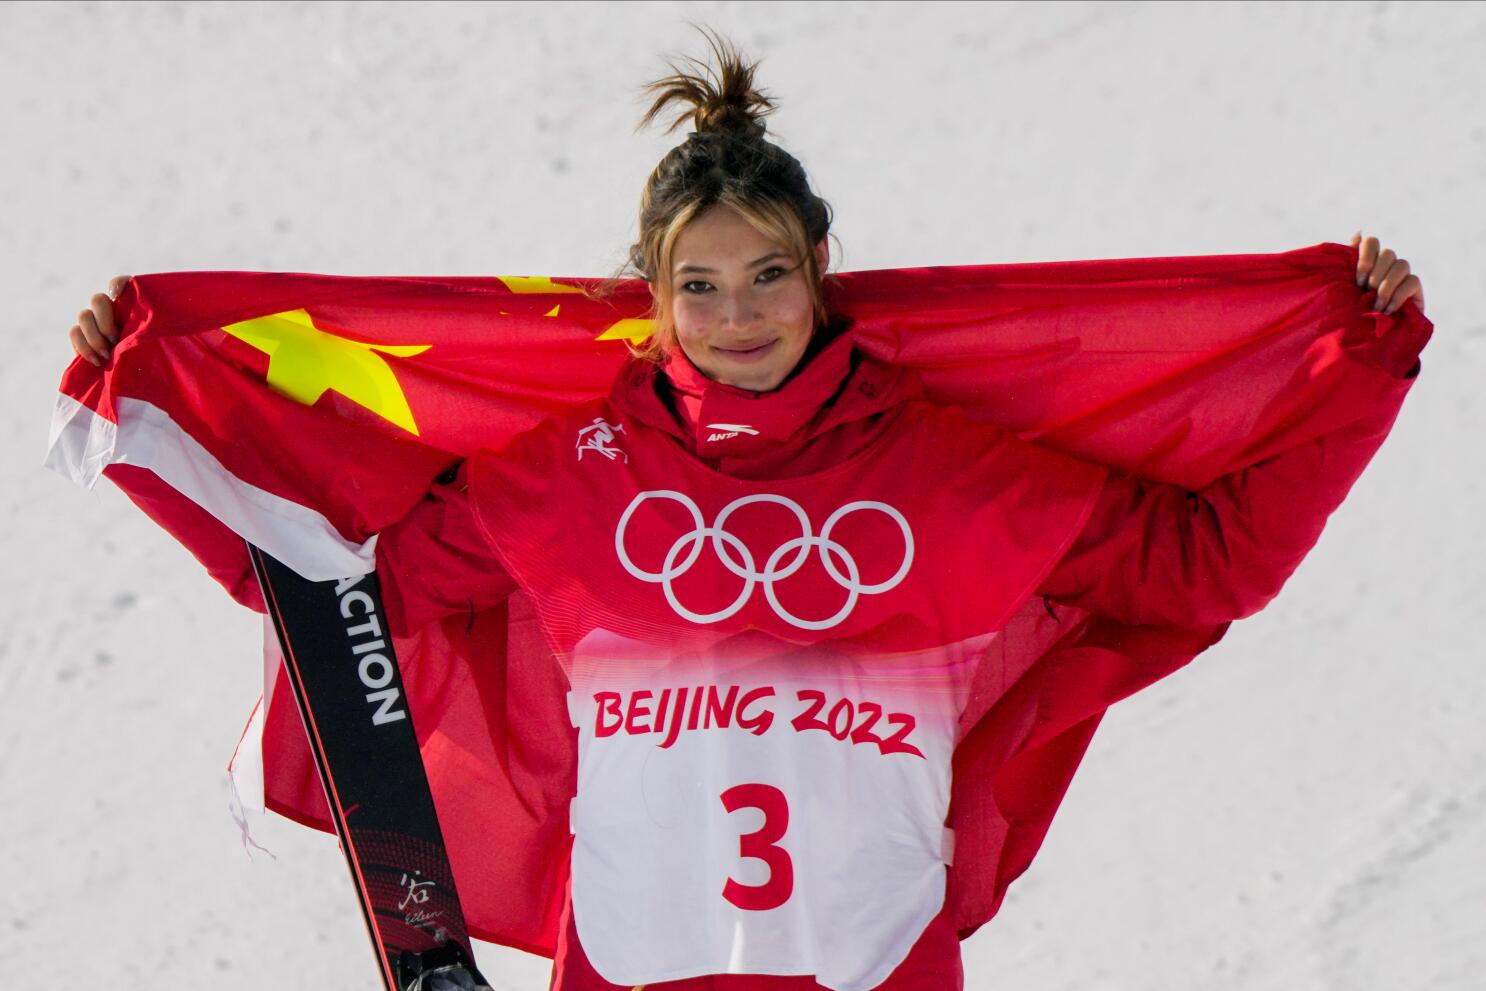 Why gold medalist Eileen Gu competed for China after growing up in